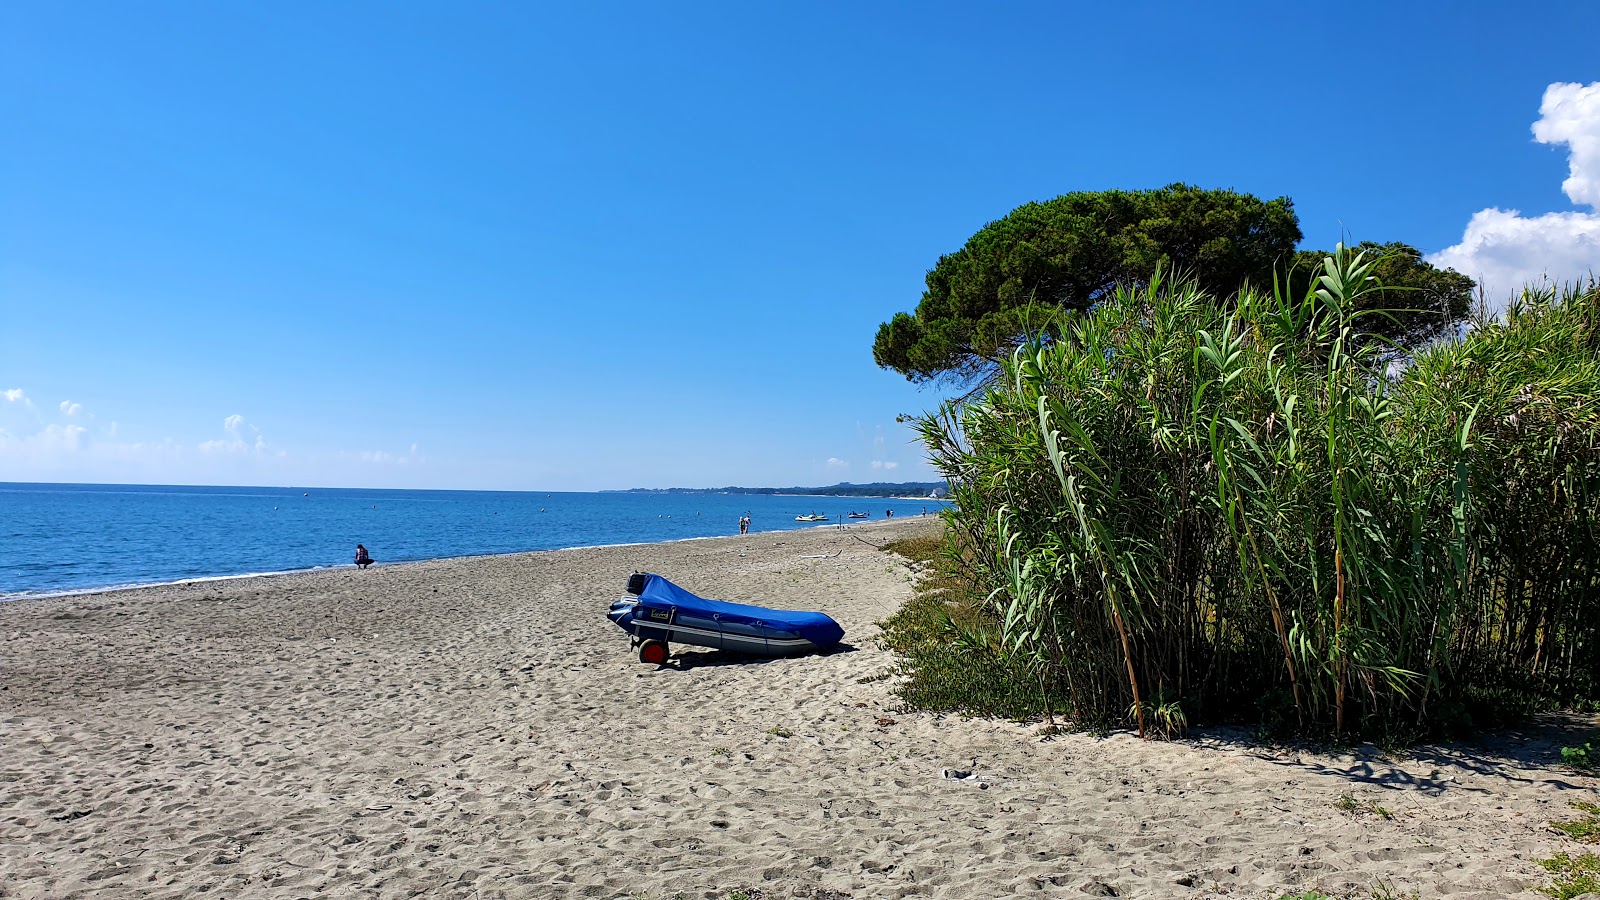 Photo of Ponticchio beach - popular place among relax connoisseurs